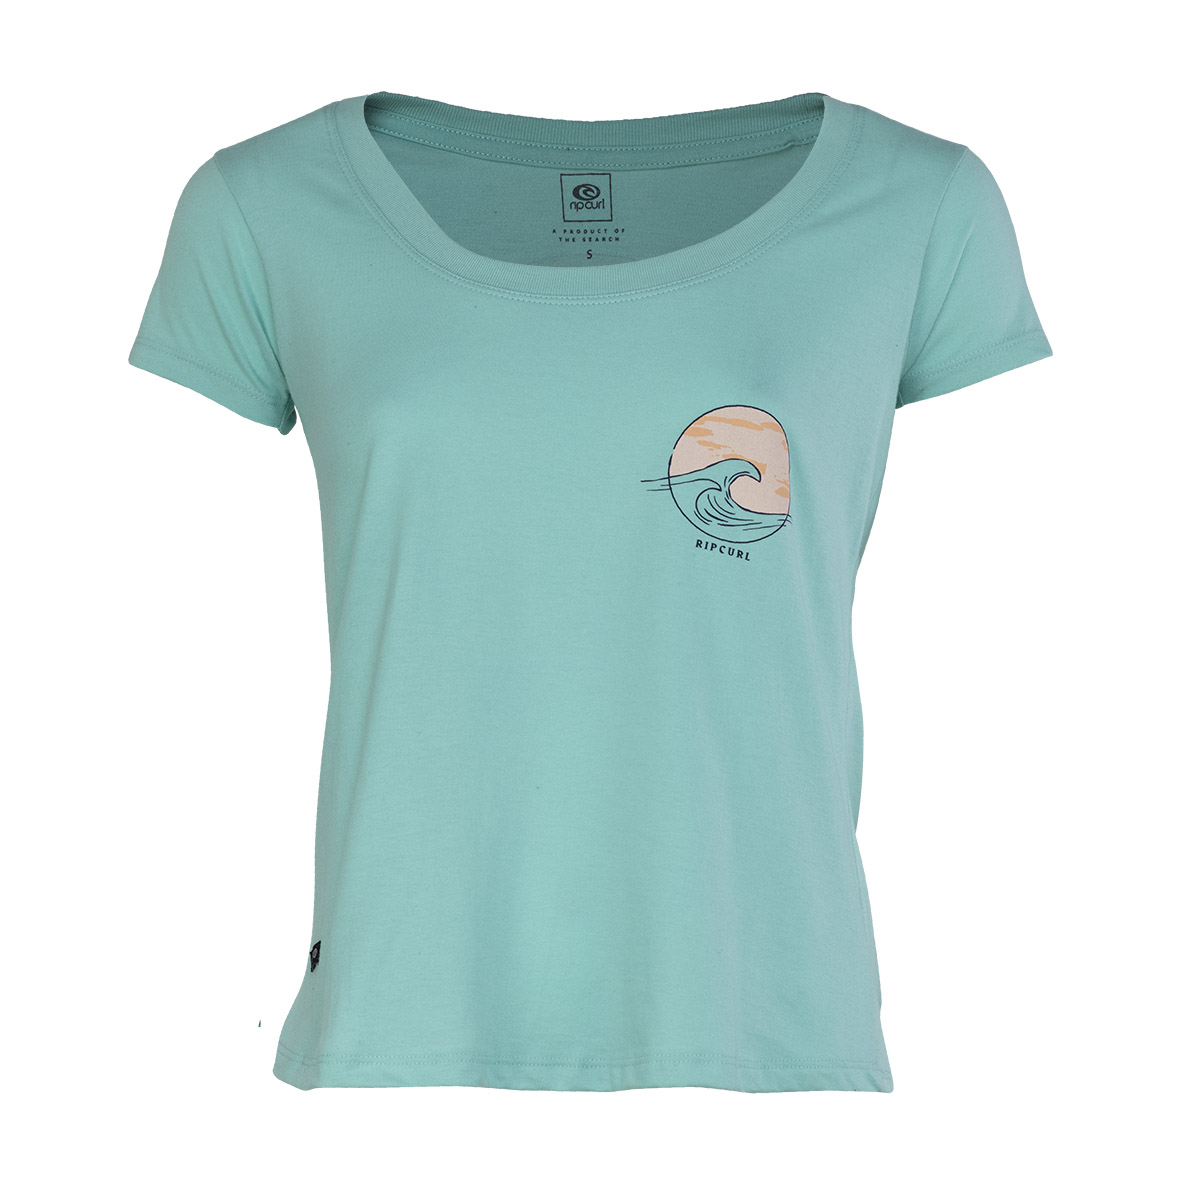 T-SHIRT RIP CURL S/S SUNSET WAVE